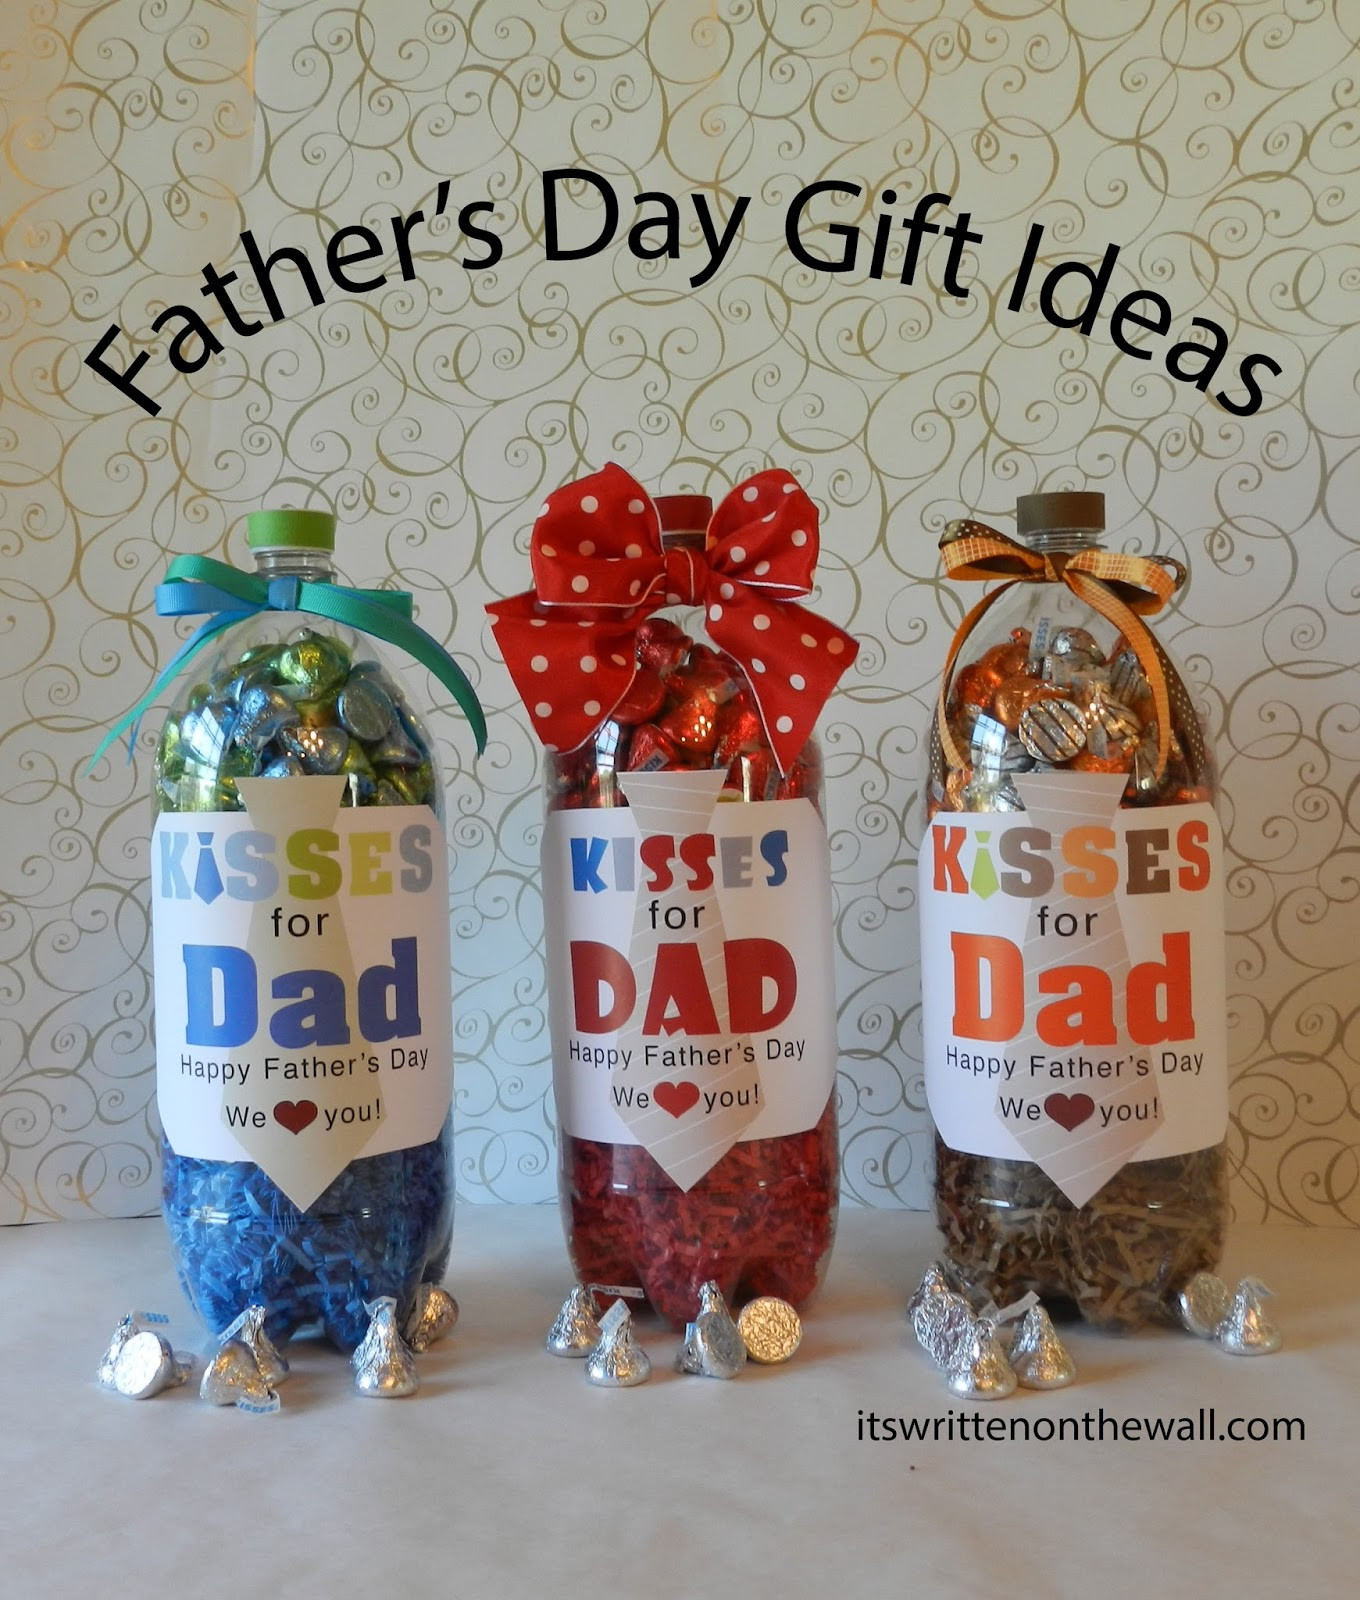 Fathers Day Unique Gifts
 It s Written on the Wall Fathers Day Gift Ideas For the